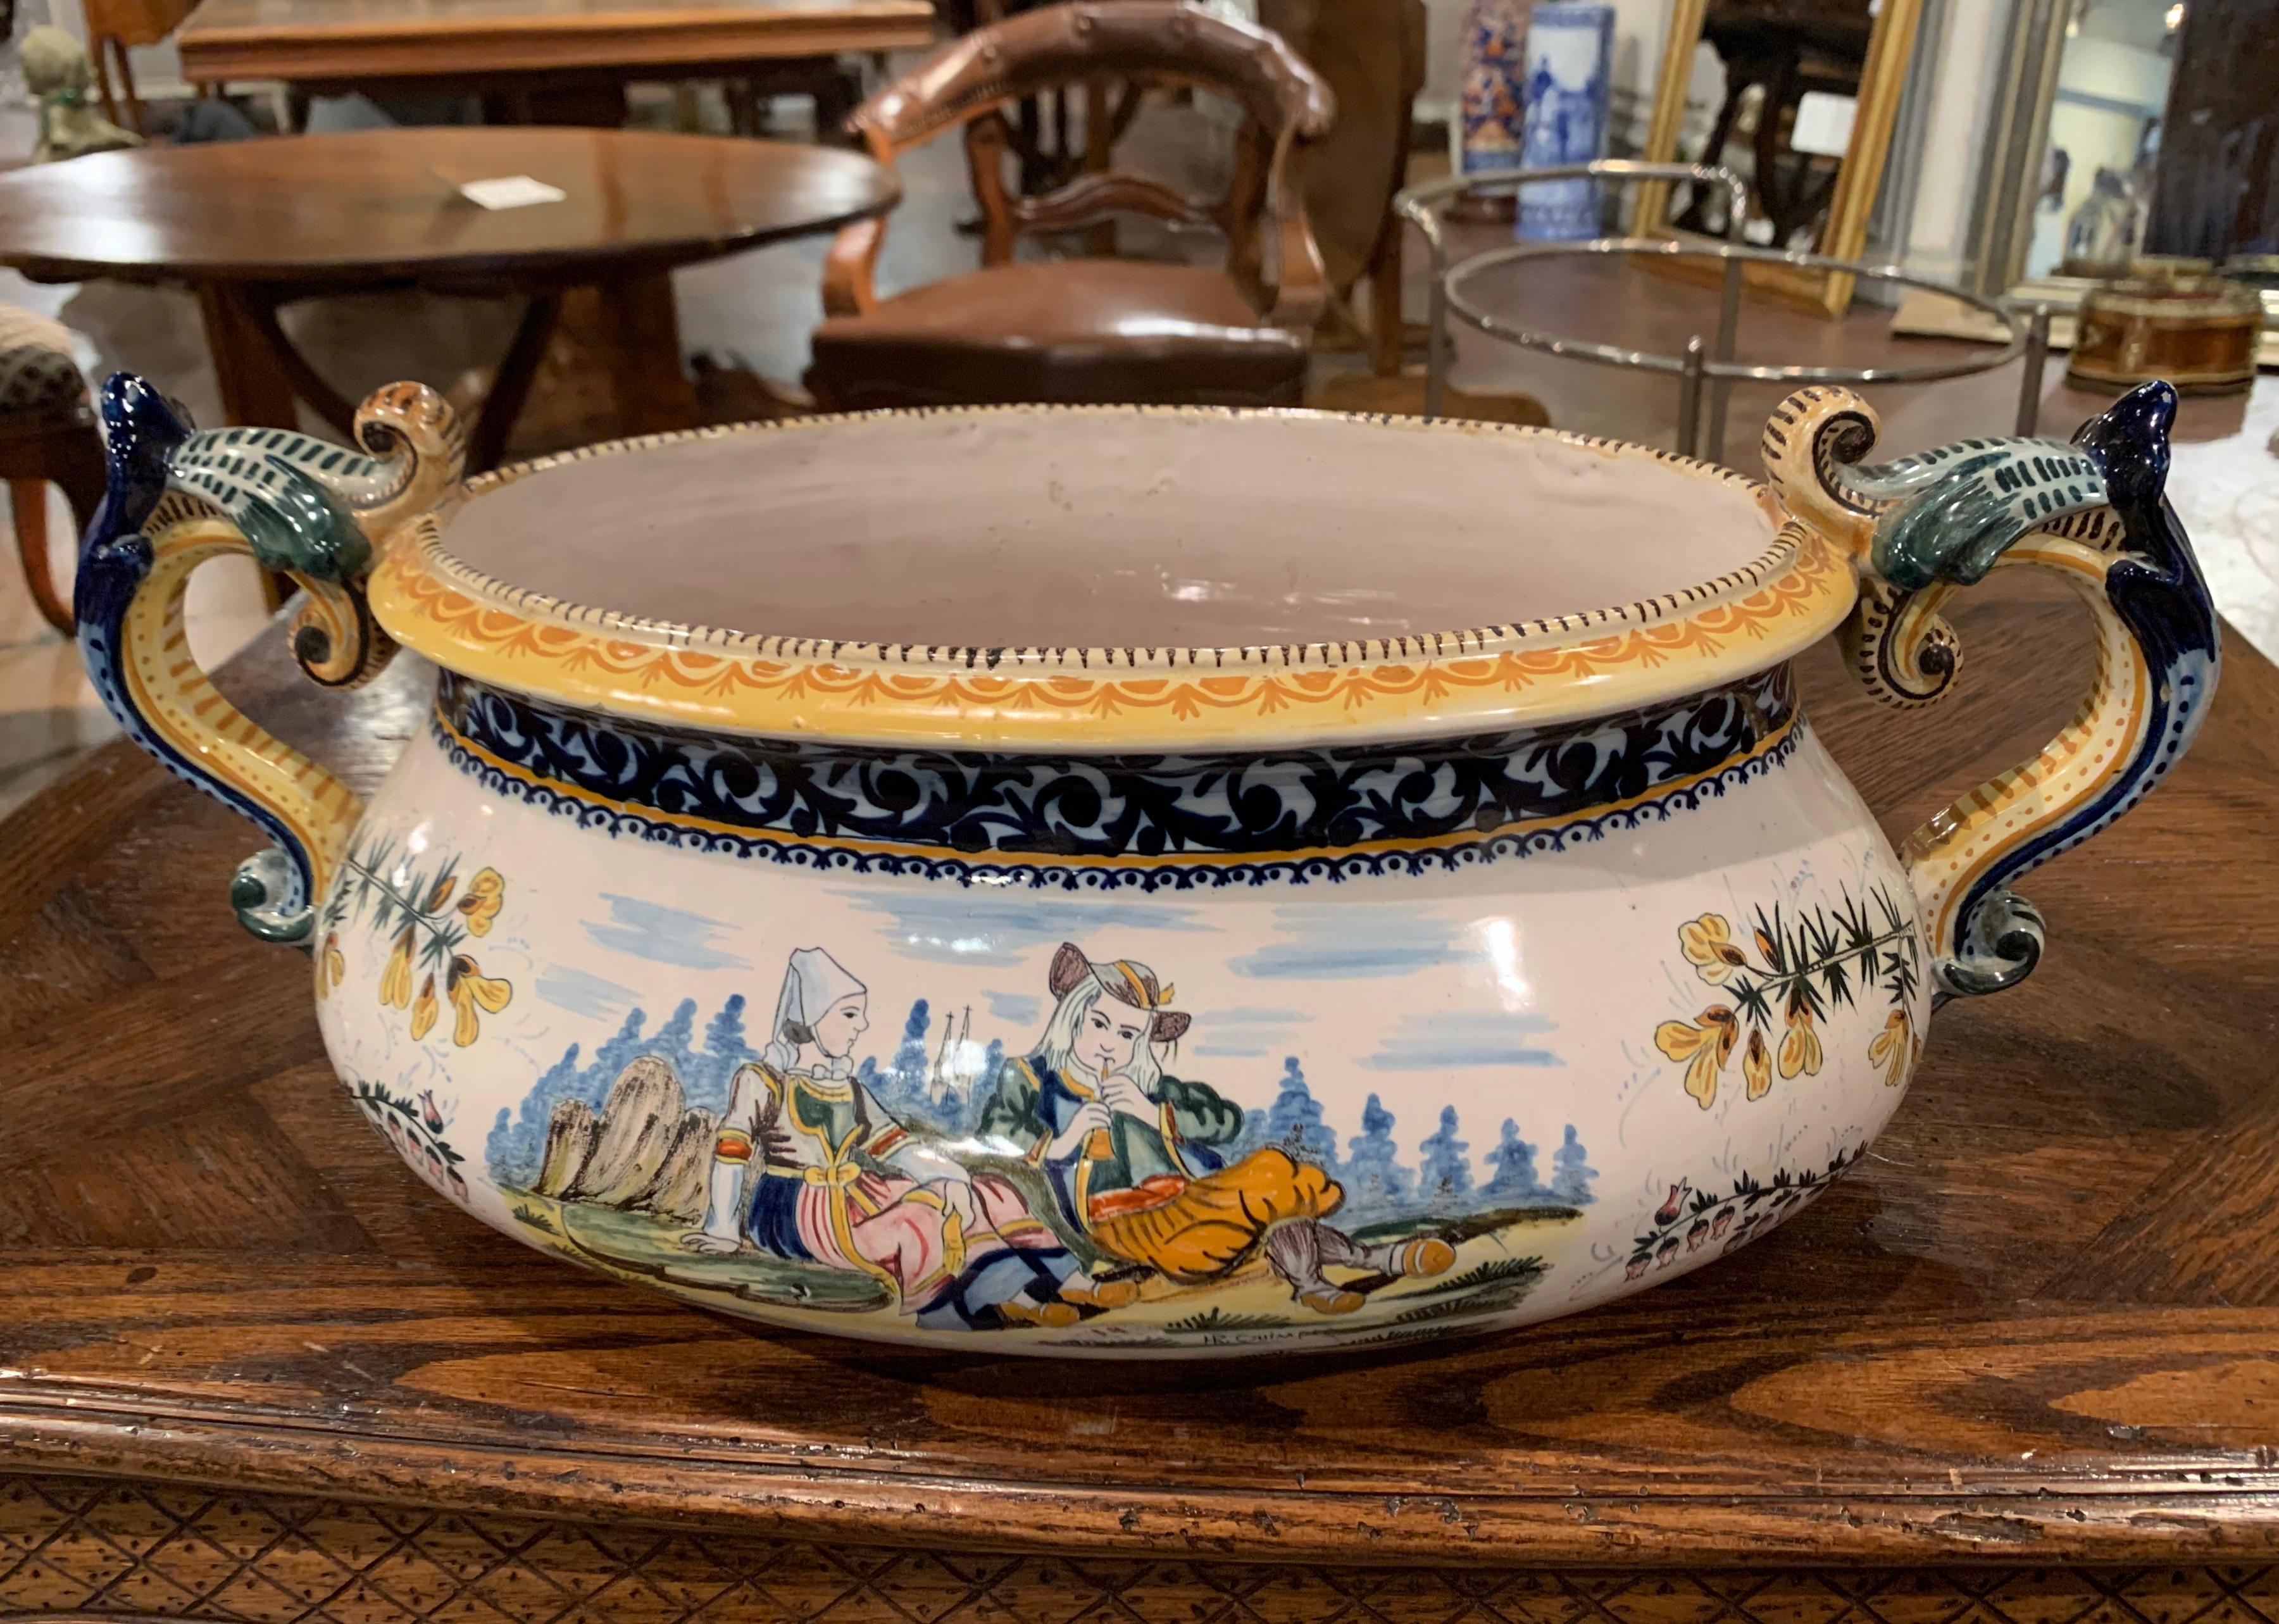 This large and colorful oval cachepot was sculpted in Brittany, France, circa 1890. The uniquely shaped pot has a large mouth, two side handles, and is relatively shallow in depth. The hand painted jardinière features a Classic Briton couple dressed